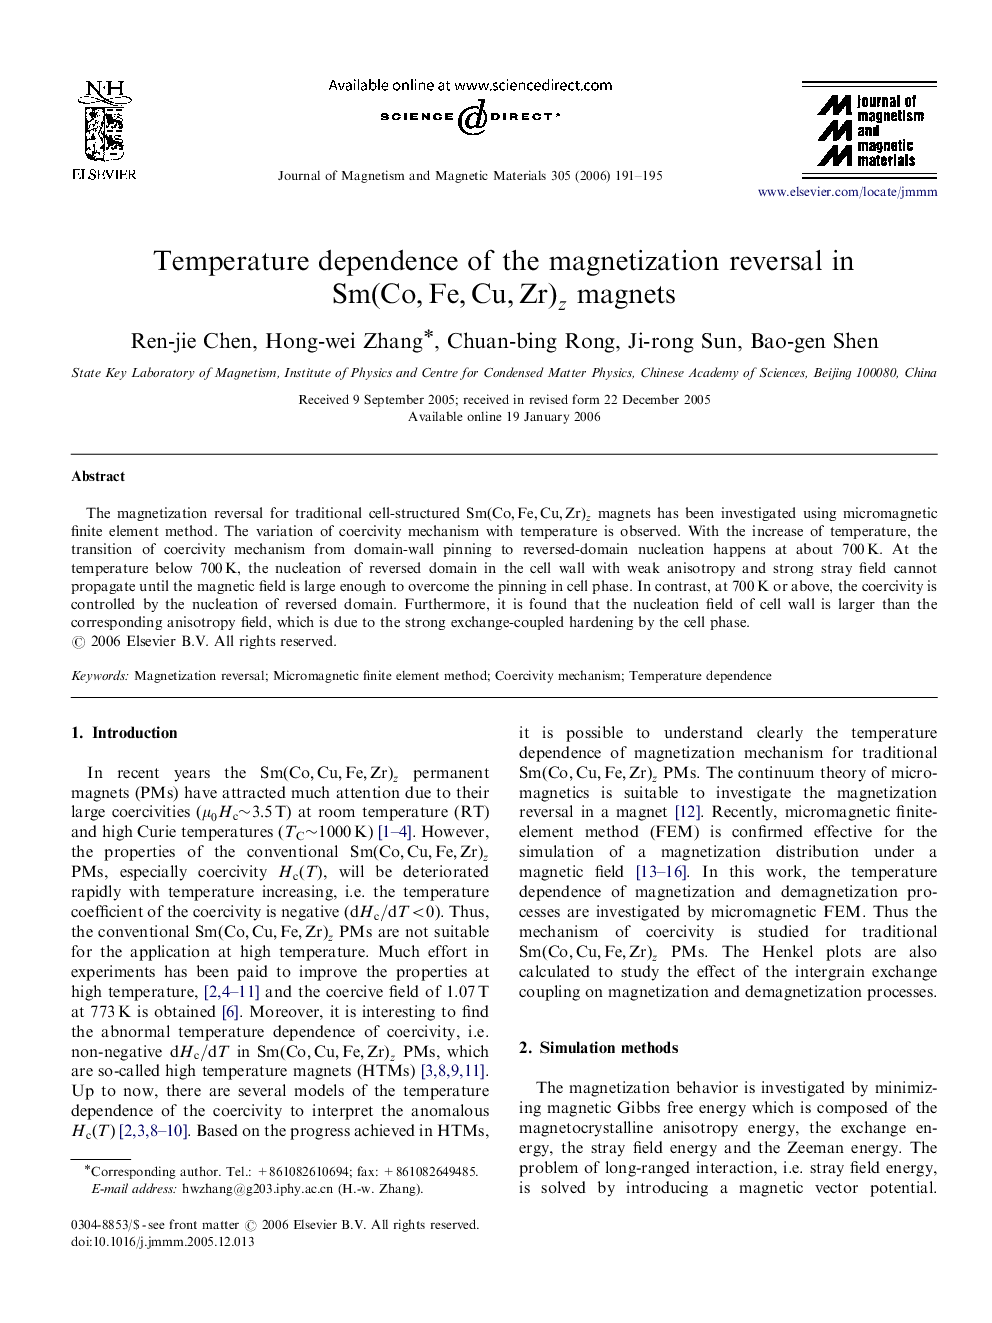 Temperature dependence of the magnetization reversal in Sm(Co,Fe,Cu,Zr)zSm(Co,Fe,Cu,Zr)z magnets